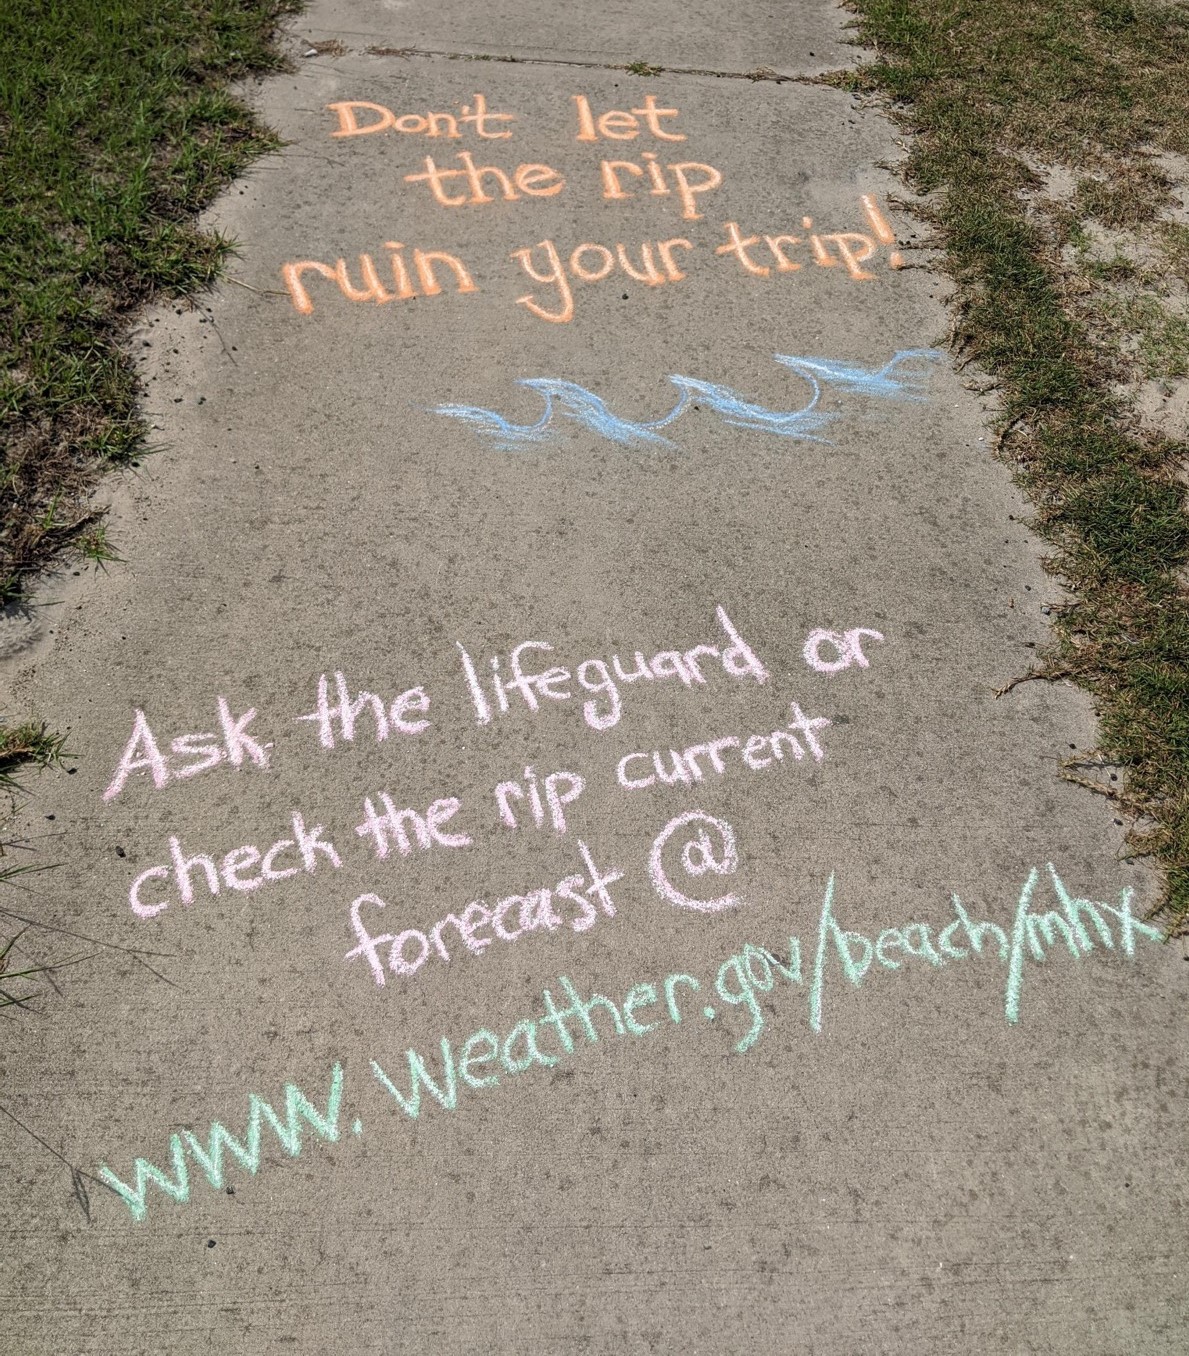 Two ocean safety messages in chalk on a sidewalk.